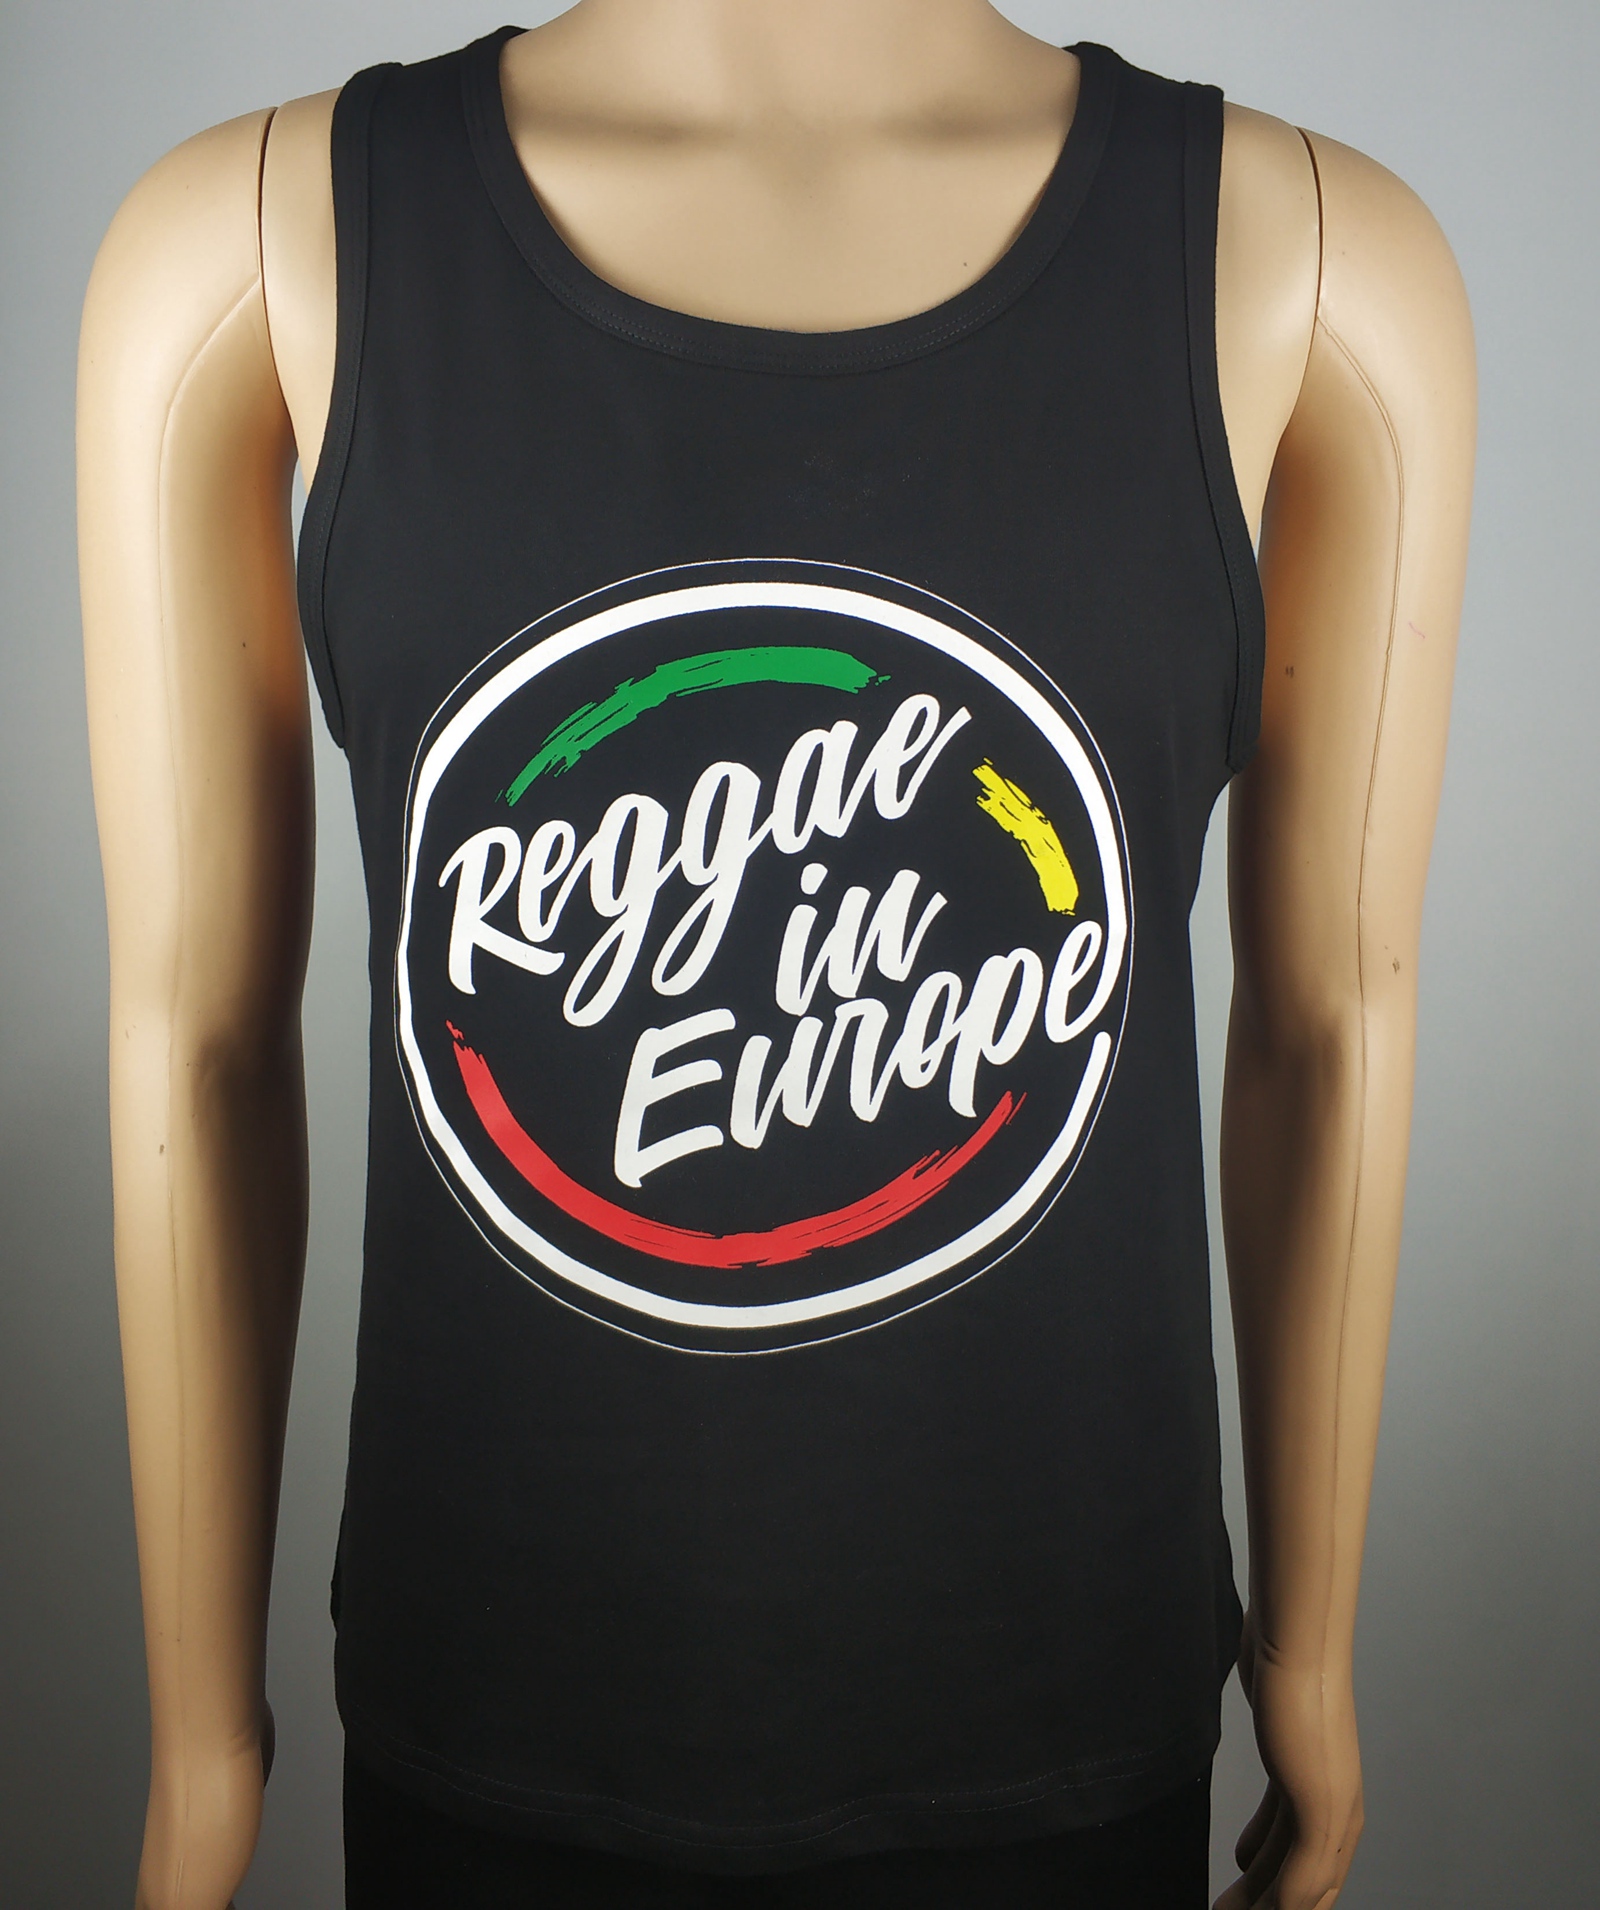 Personalized black color singlets with logo printed 